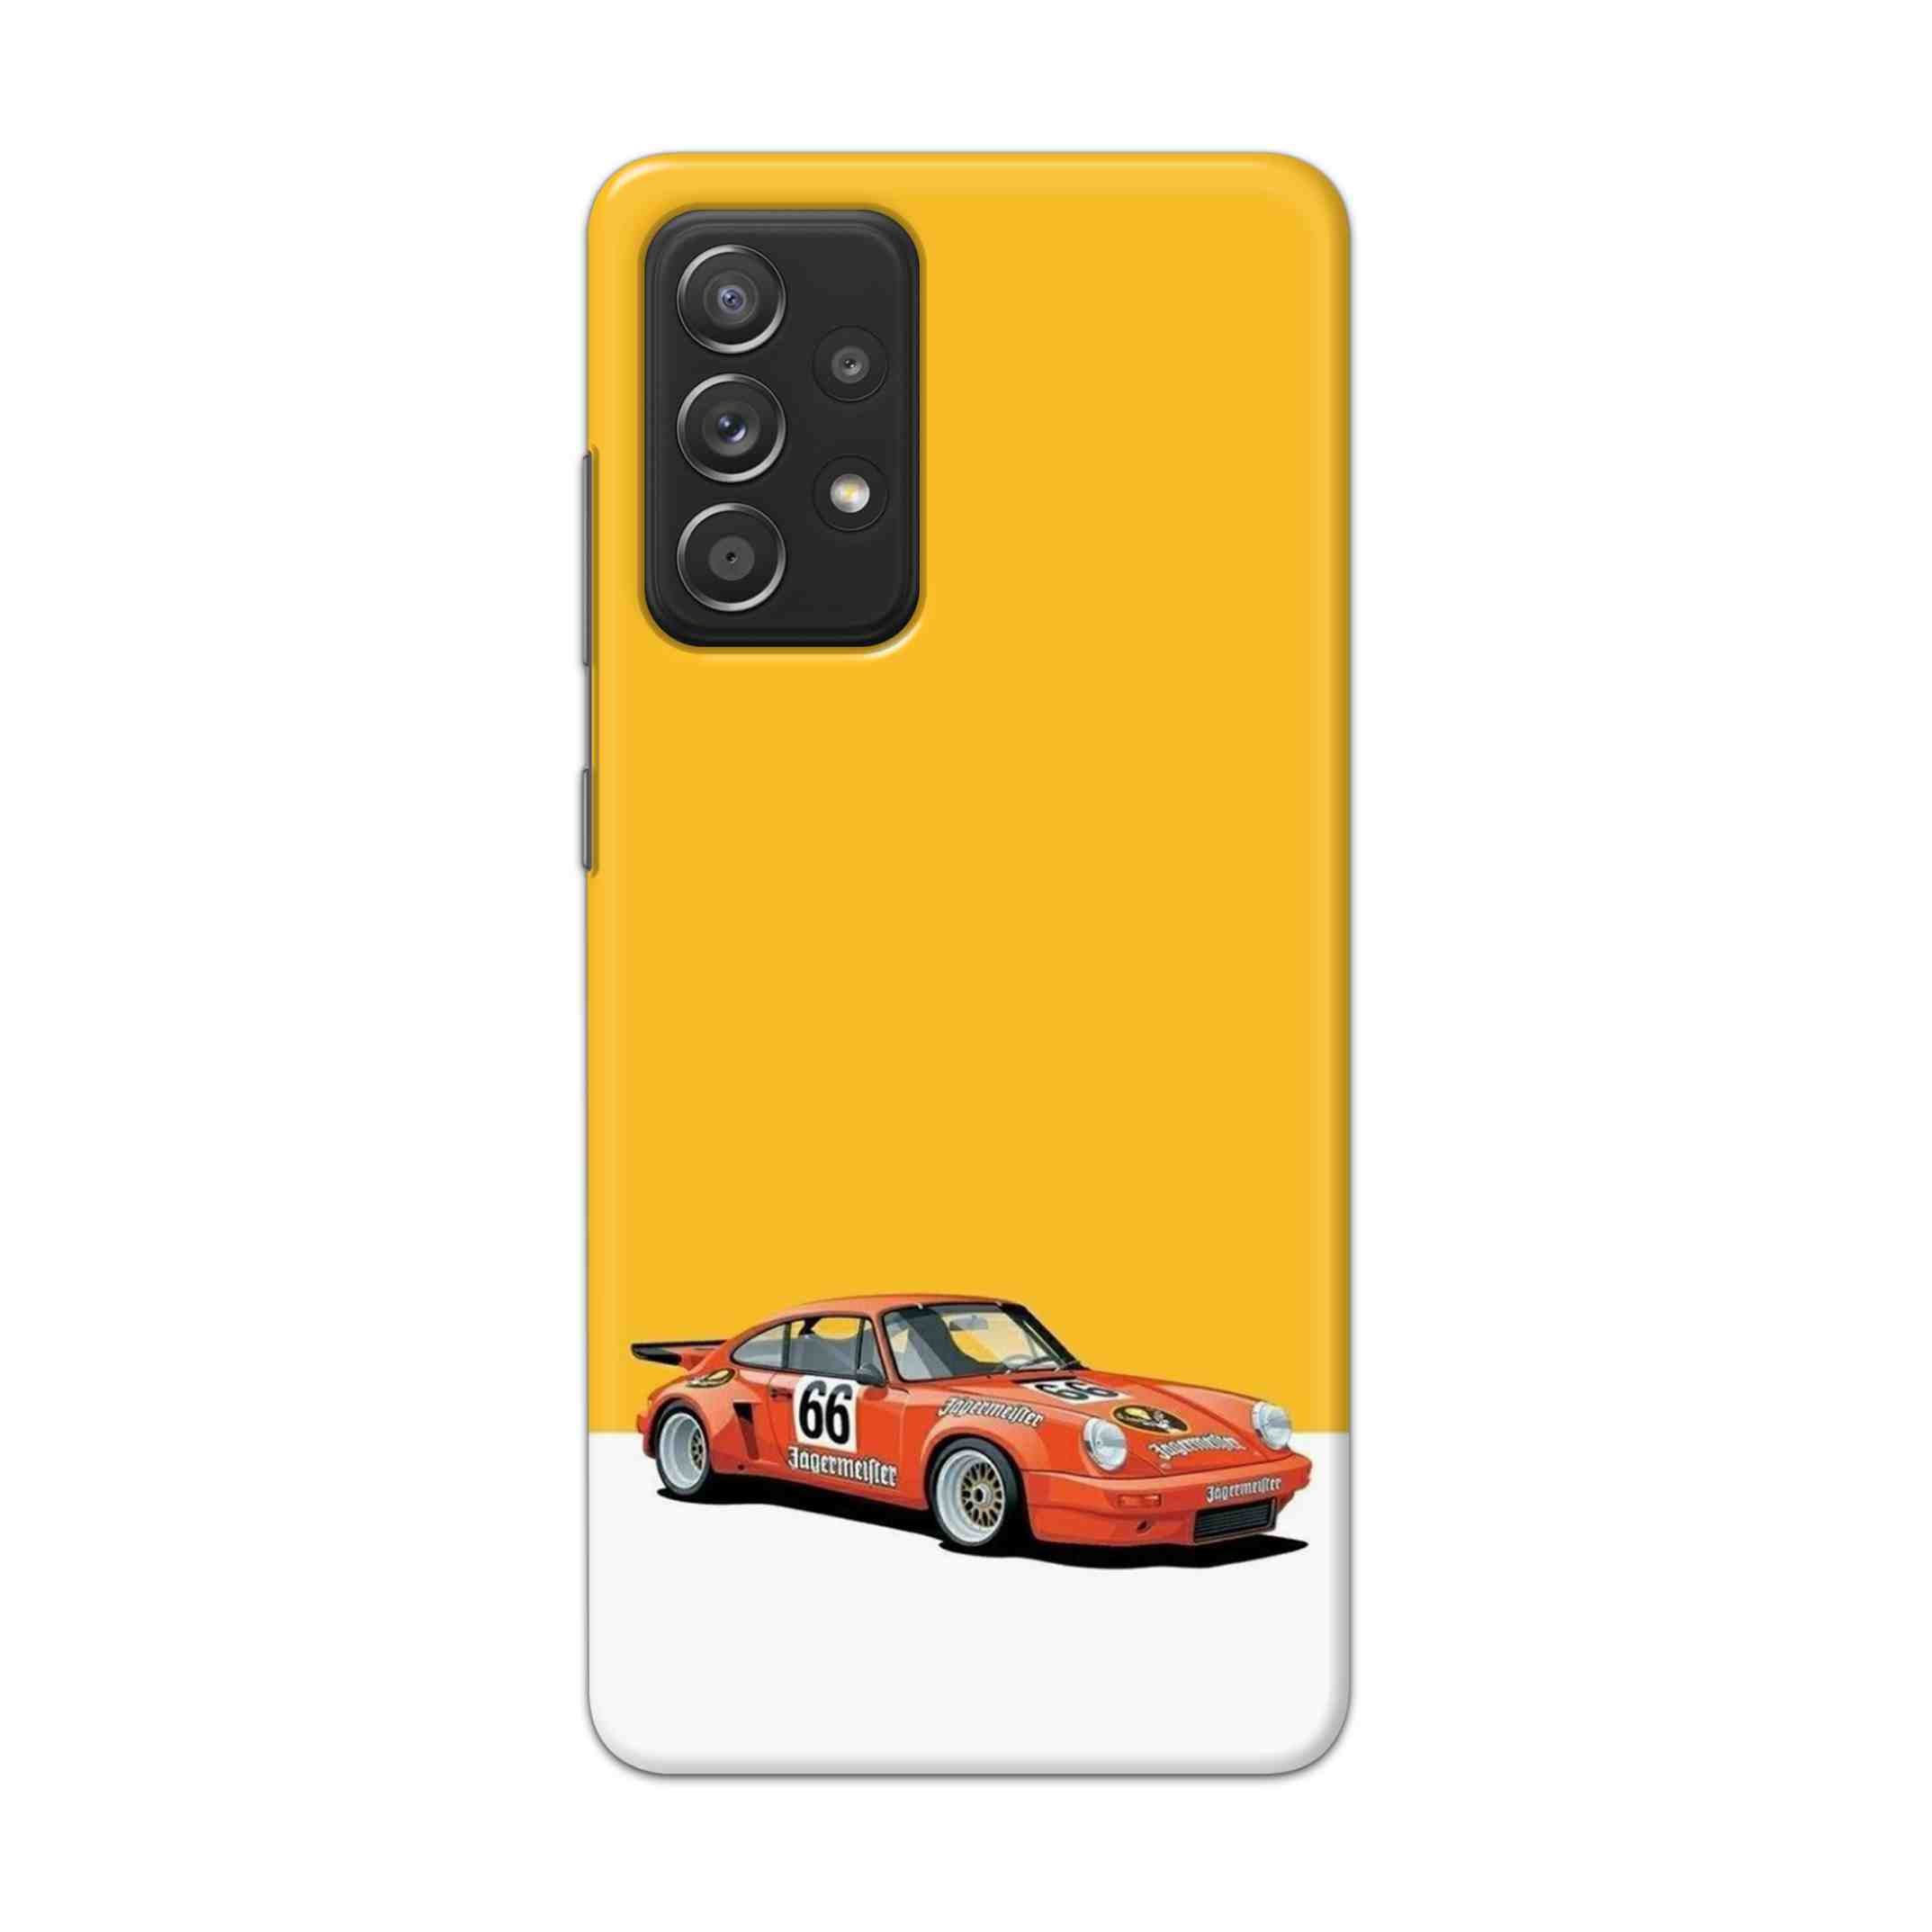 Buy Porche Hard Back Mobile Phone Case Cover For Samsung Galaxy A52 Online